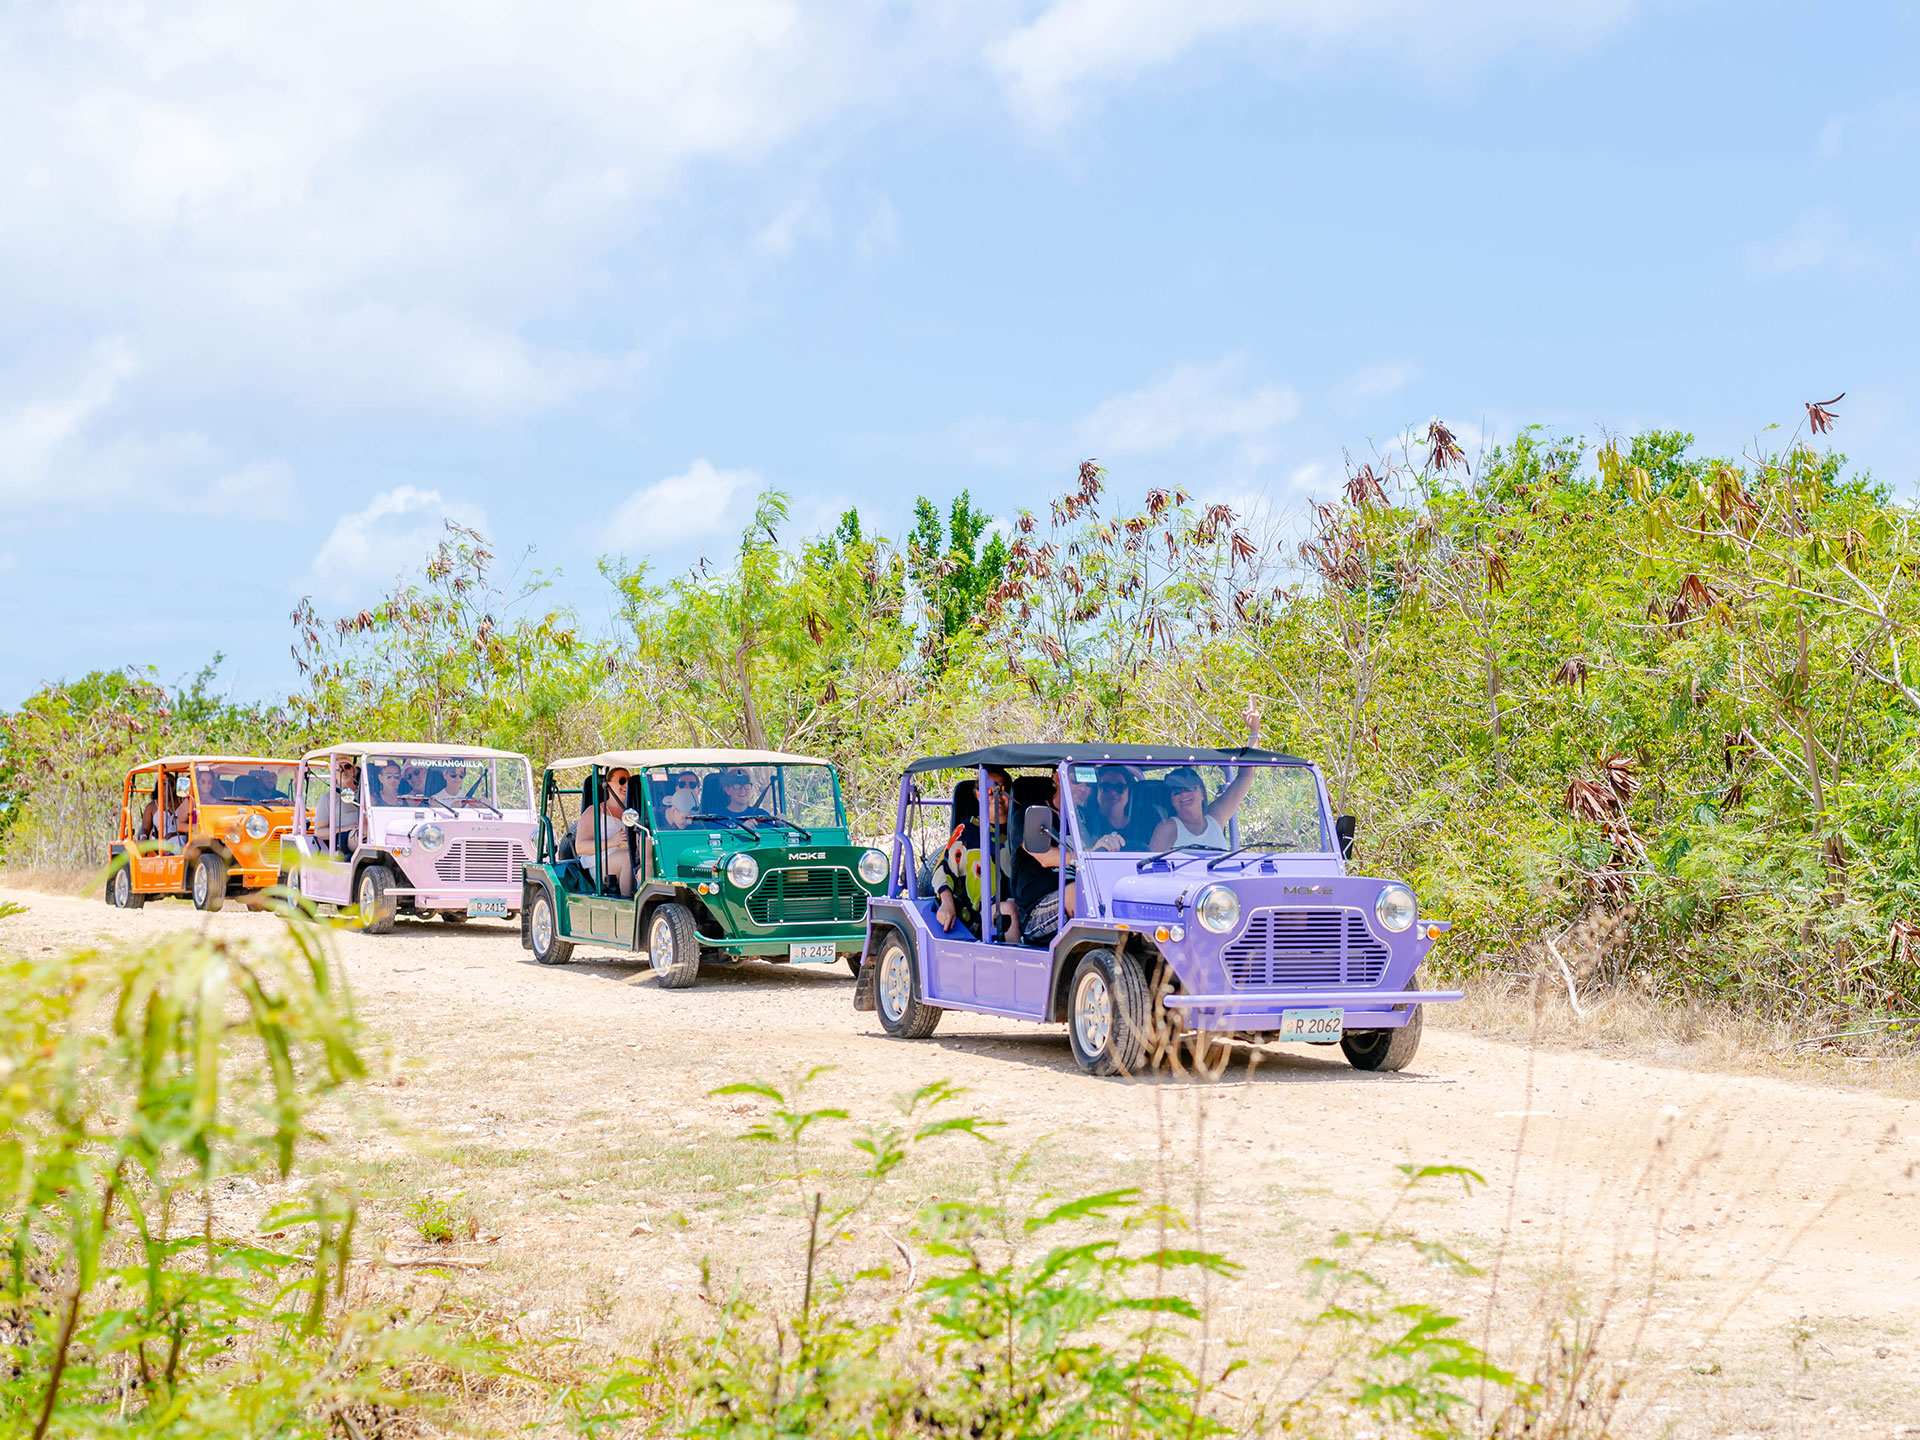 The best things to do in Anguilla | Rum crawl with moke drivers